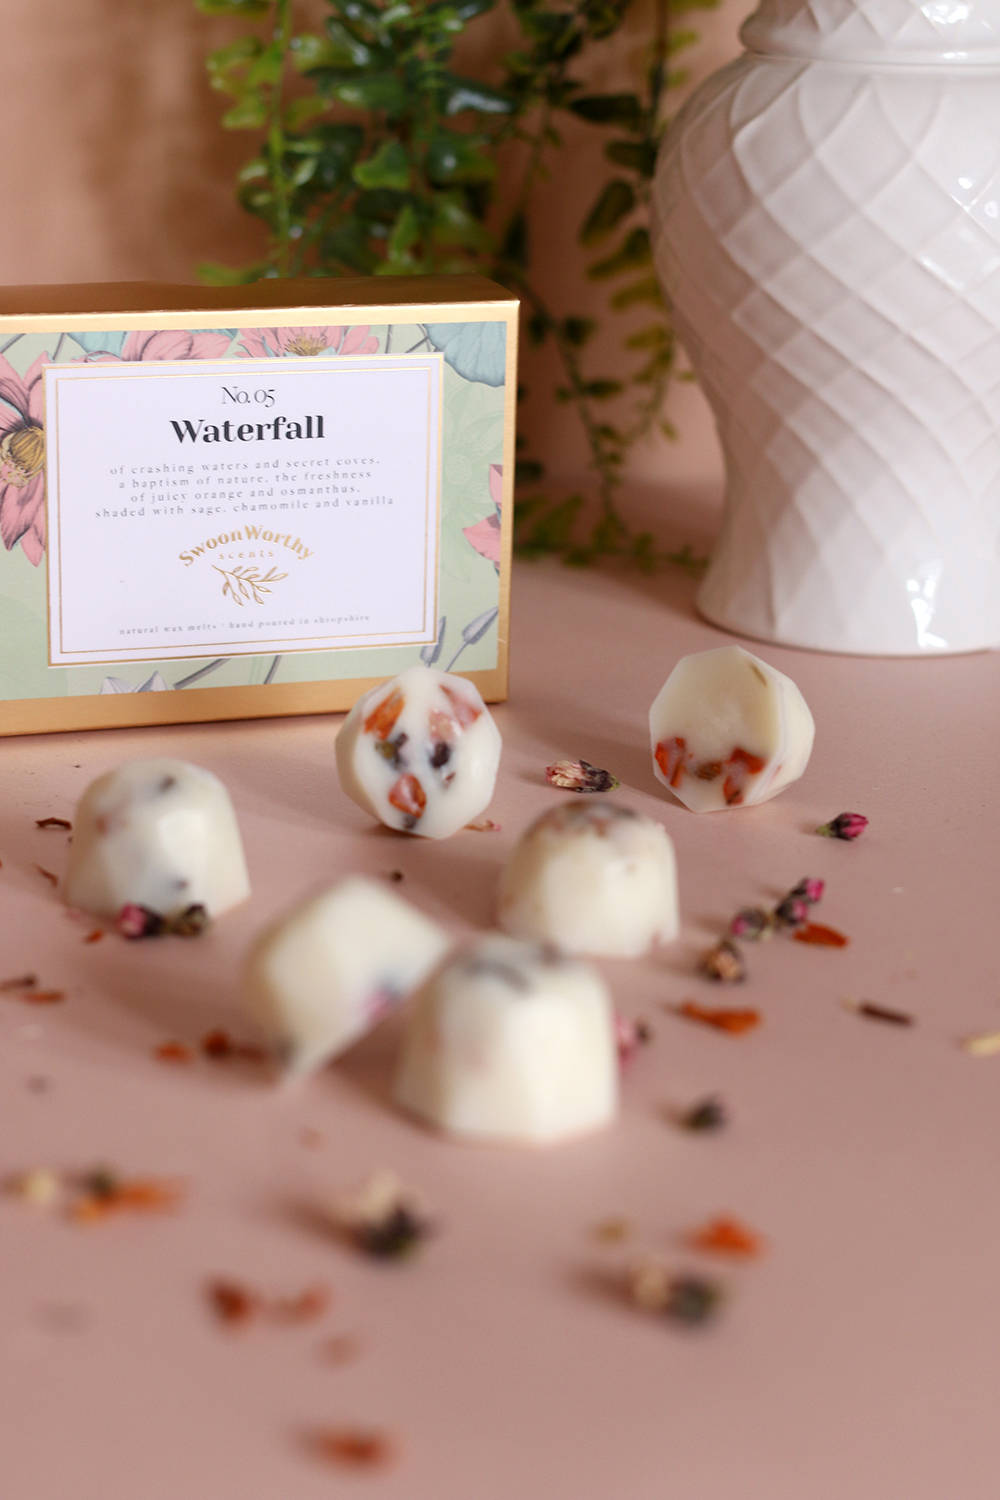 Waterfall orange osmanthus sage and chamomile scented wax melts